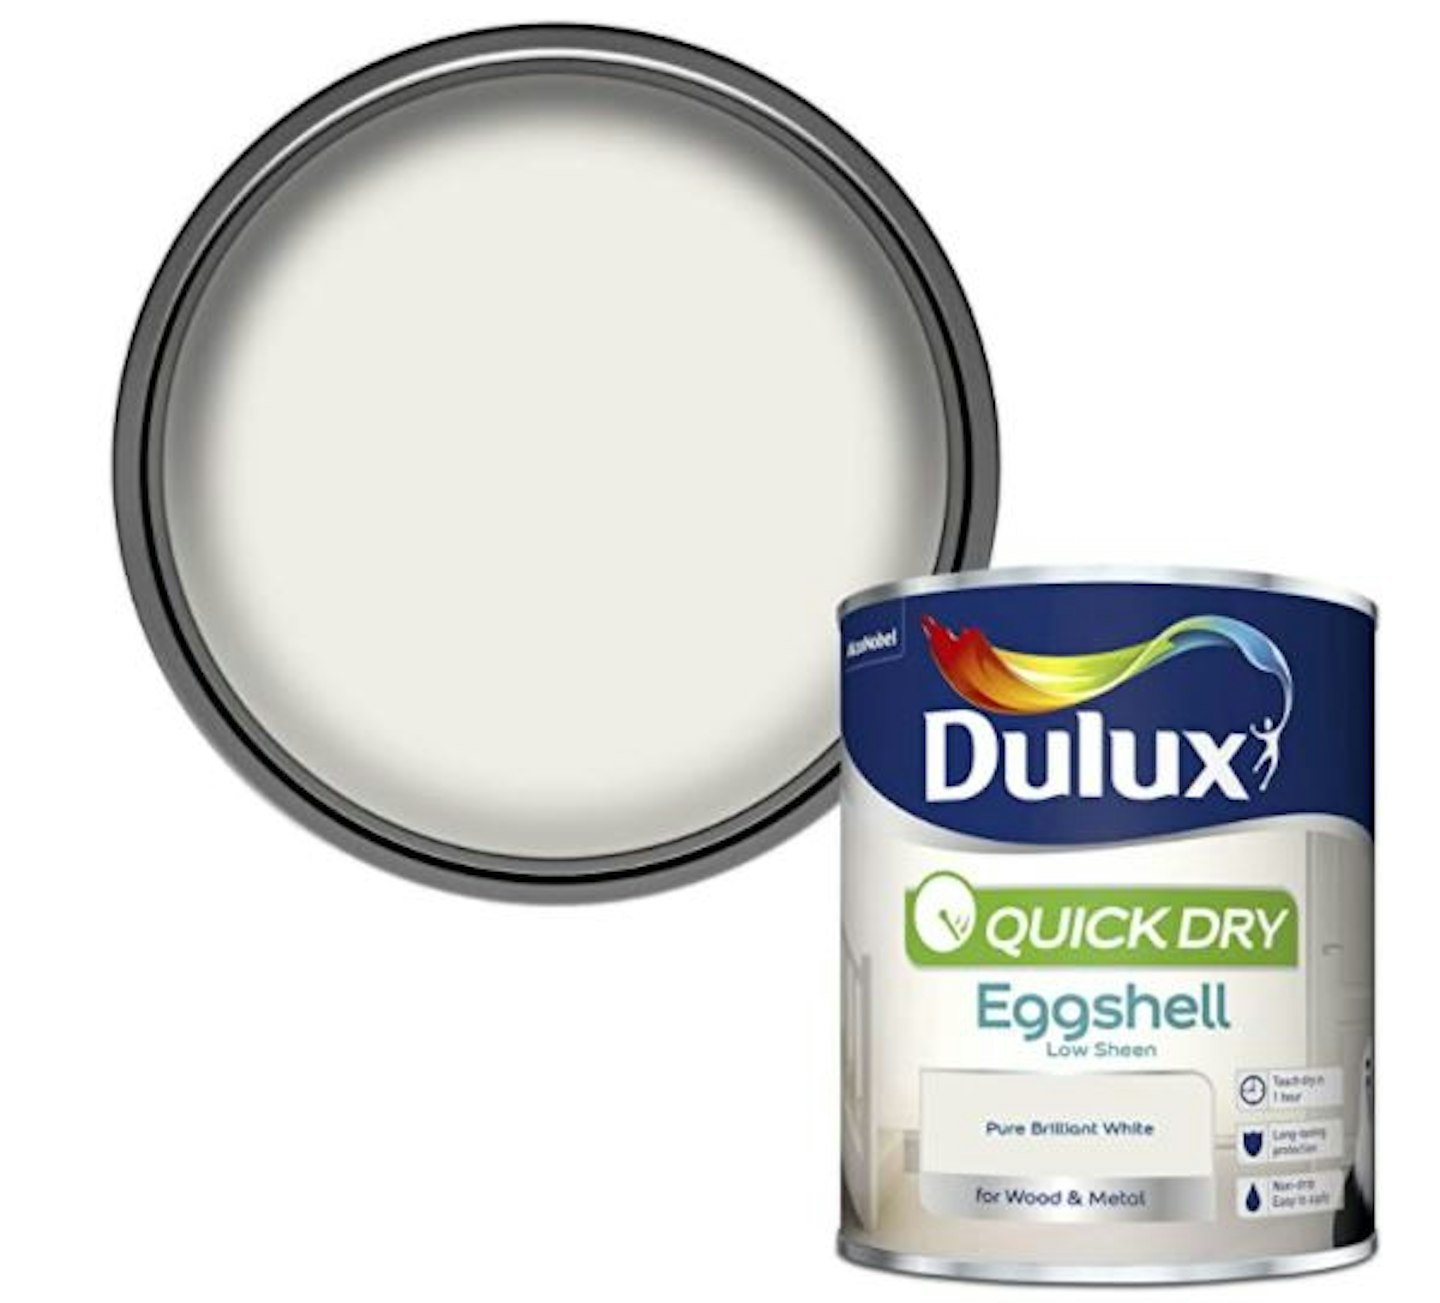 Dulux Quick Dry Eggshell Paint For Wood And Metal